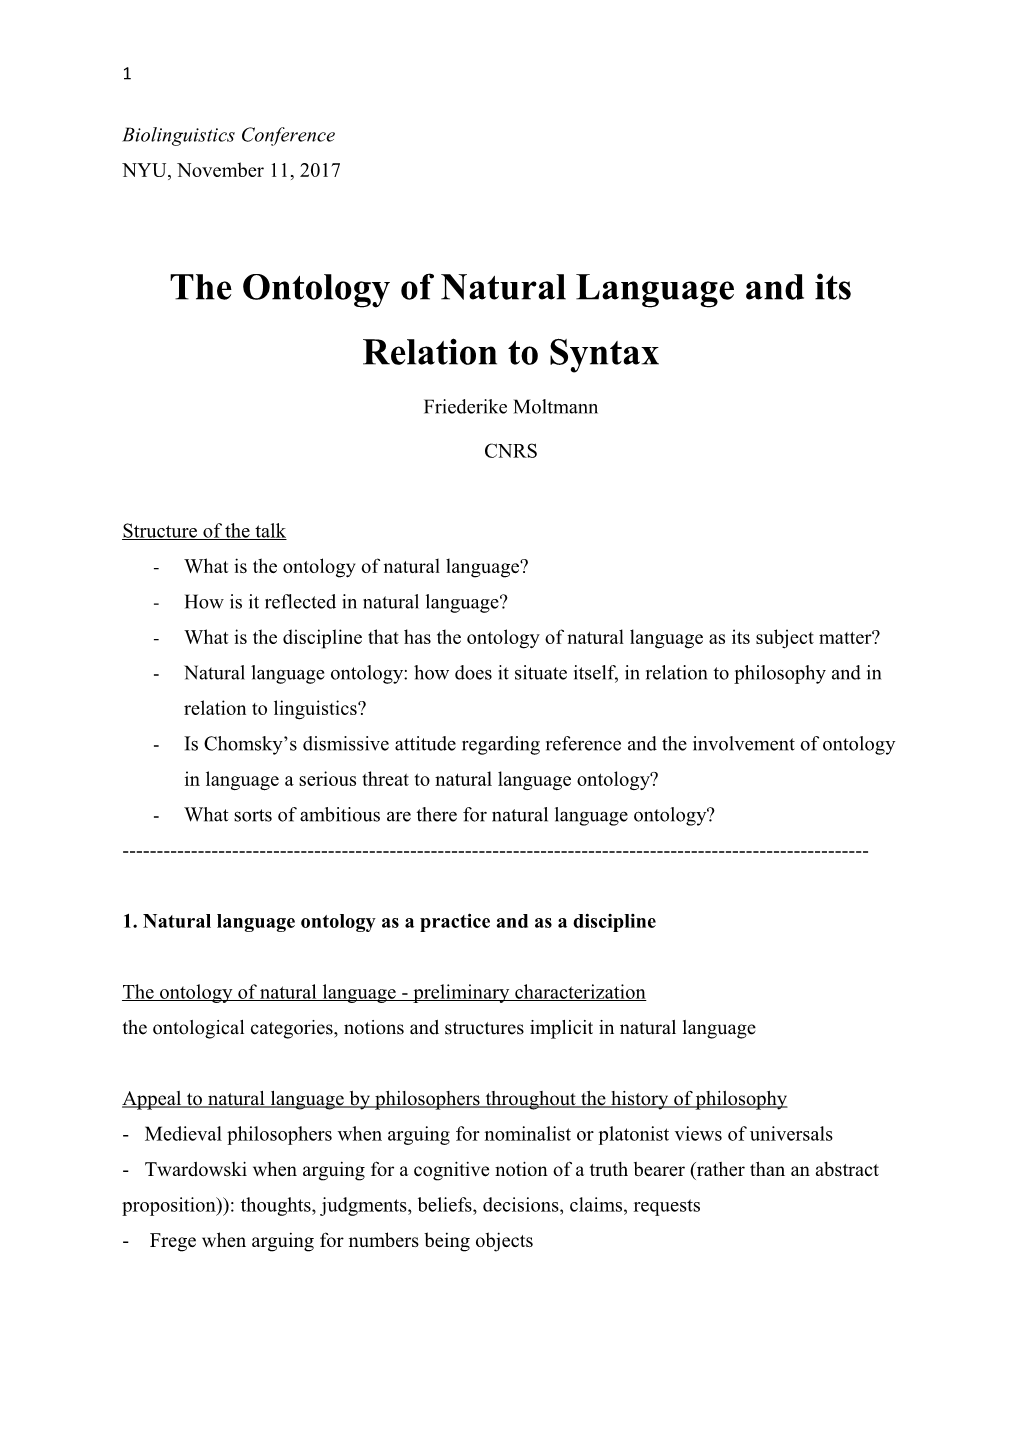 The Ontologyof Natural Language and Its Relation to Syntax